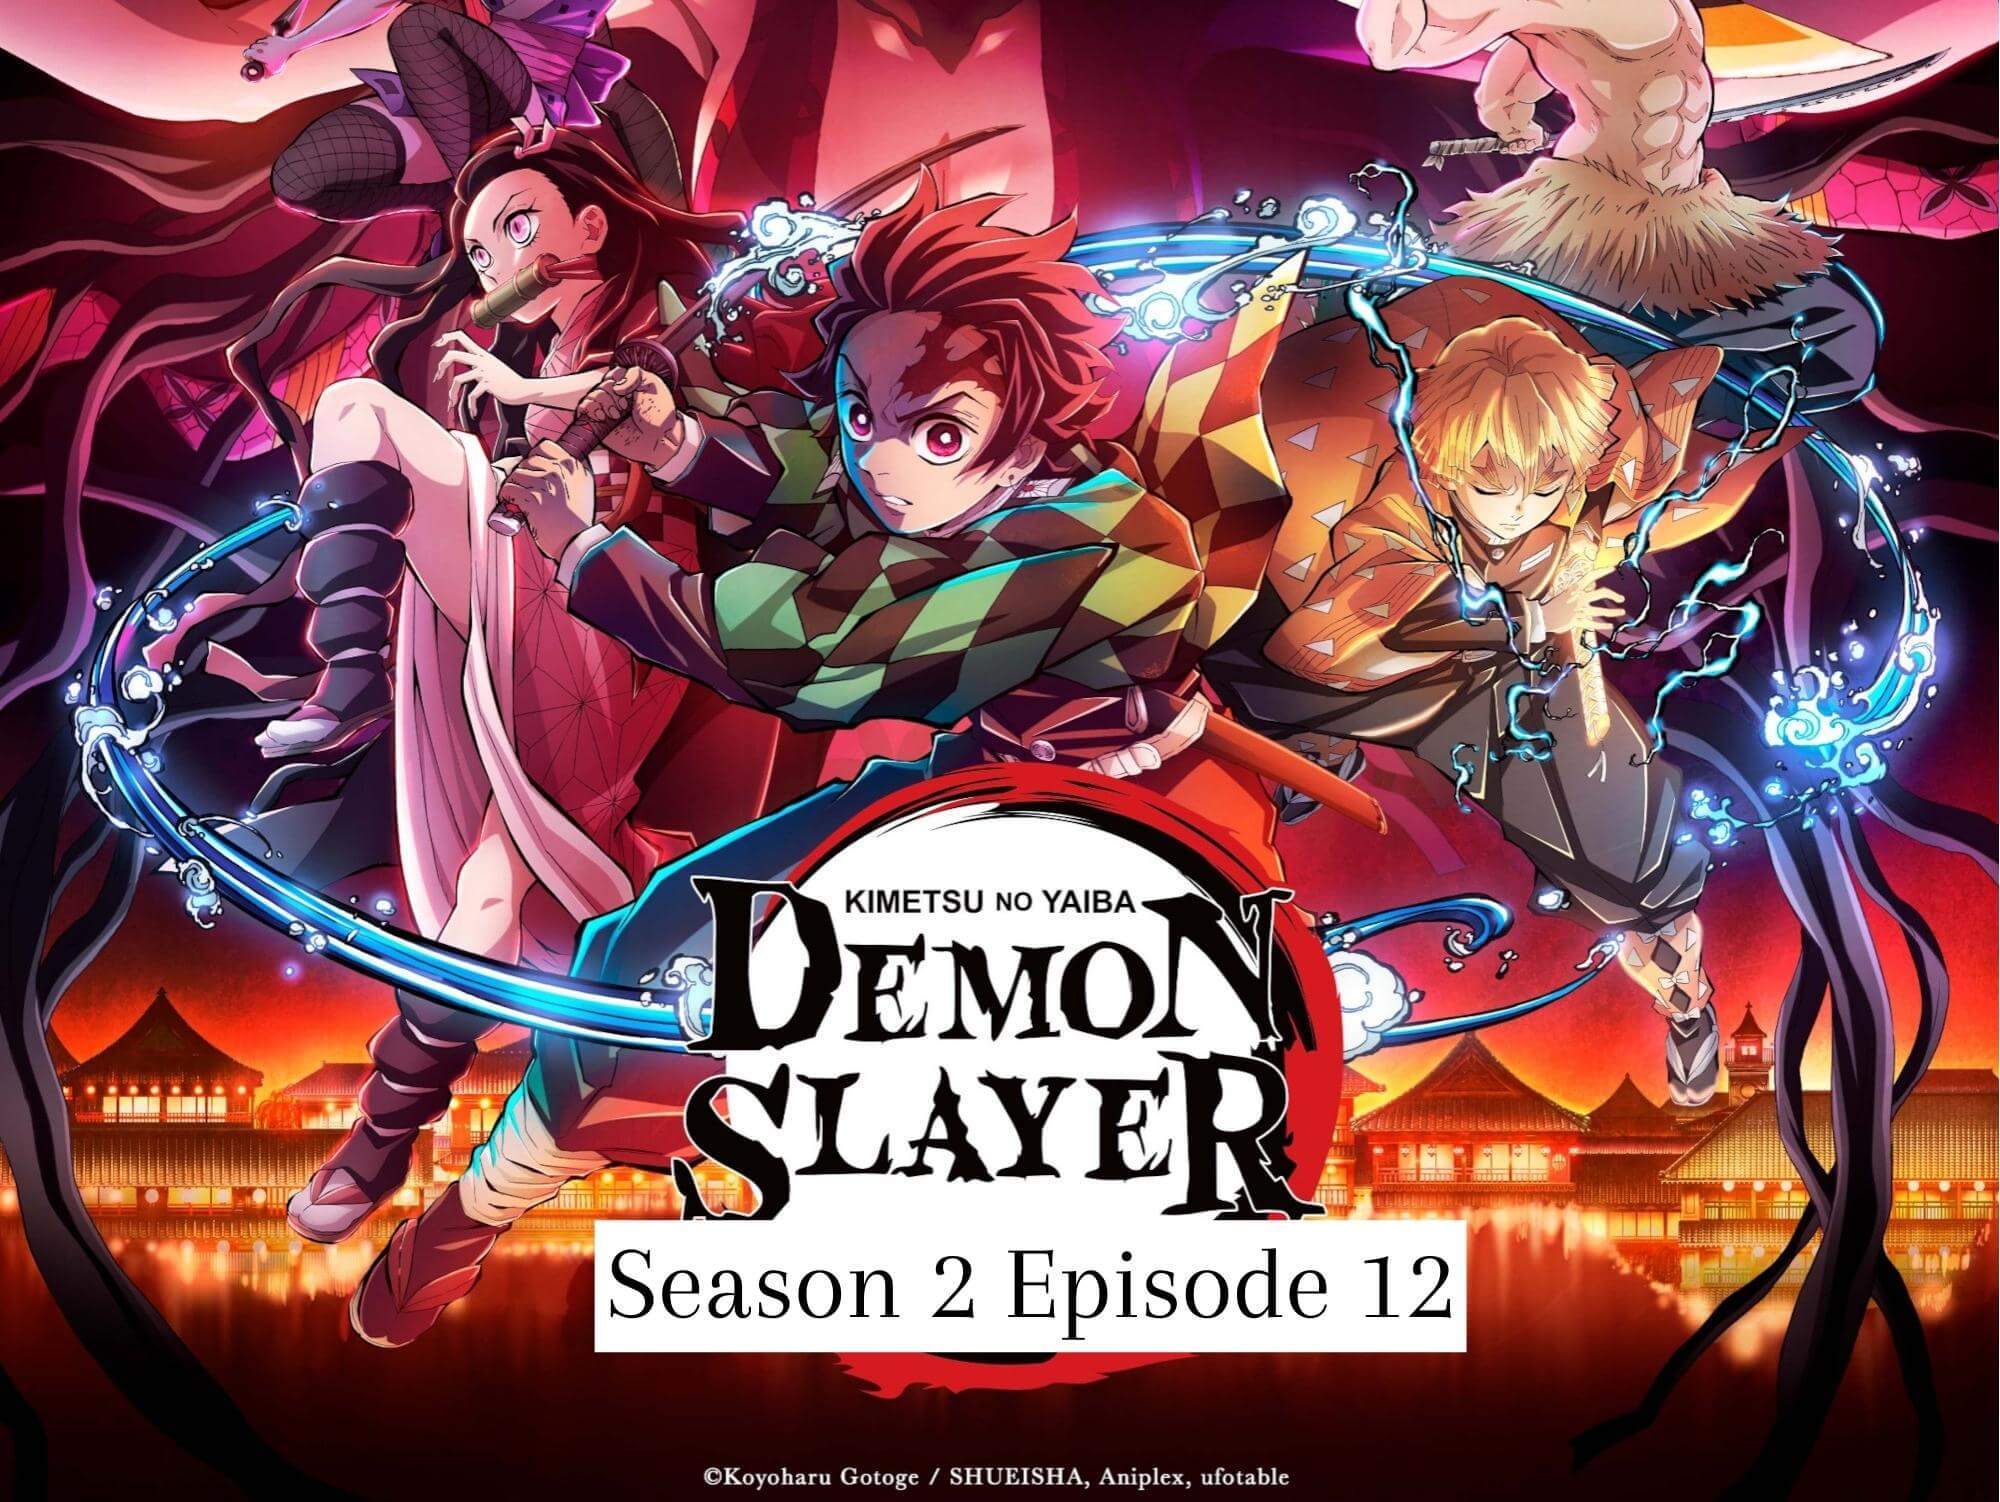 Demon Slayer Season 2 Episode 12 ⇒ Know More About Release Date and